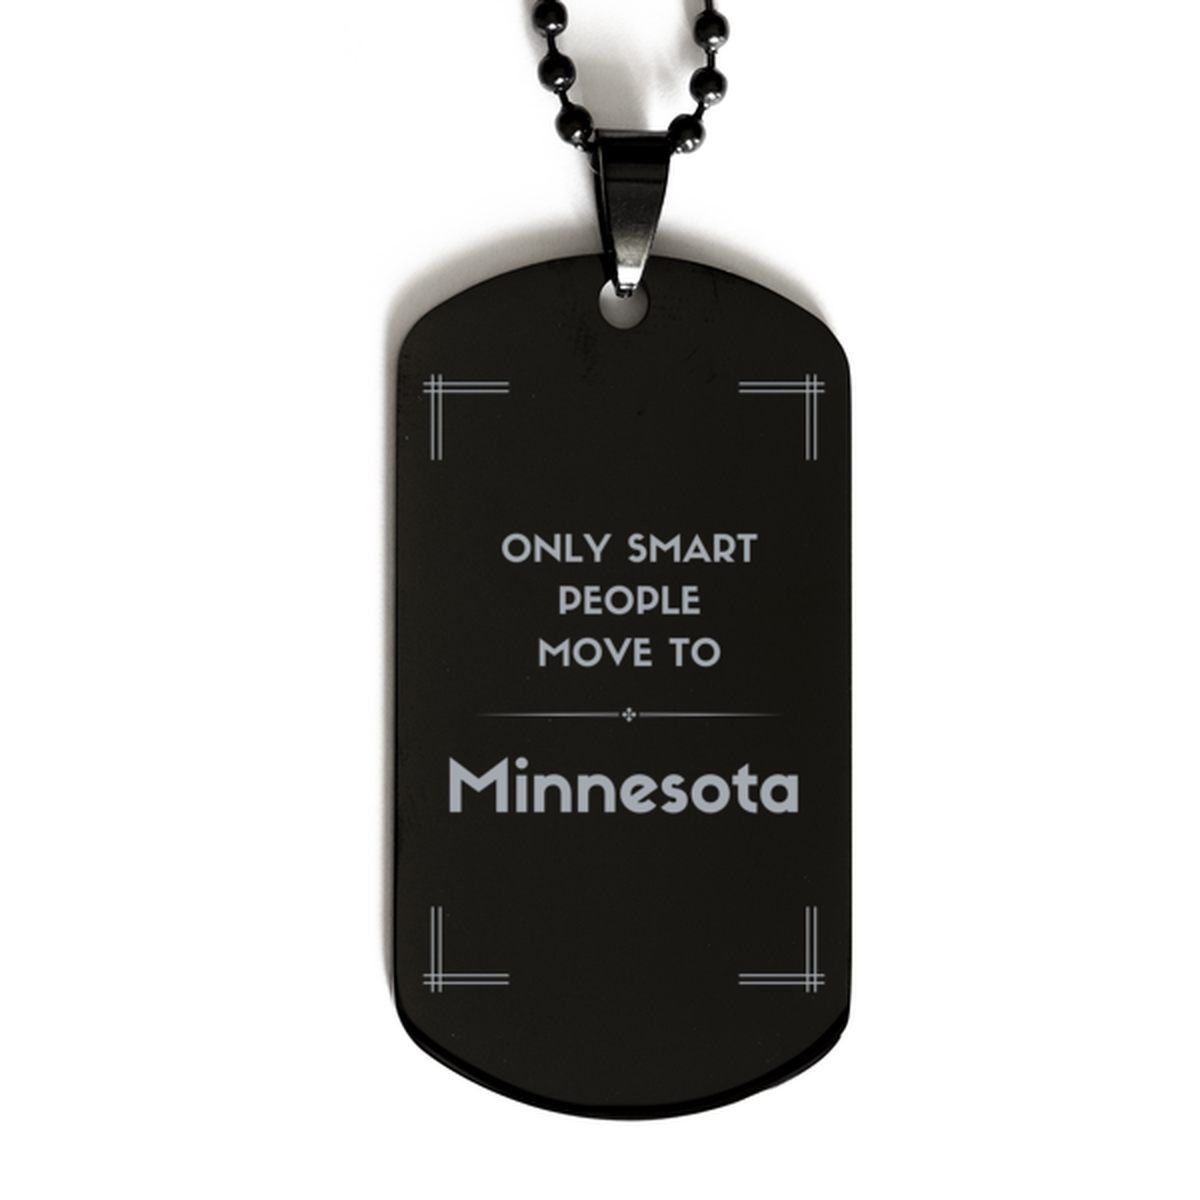 Only smart people move to Minnesota Black Dog Tag, Gag Gifts For Minnesota, Move to Minnesota Gifts for Friends Coworker Funny Saying Quote